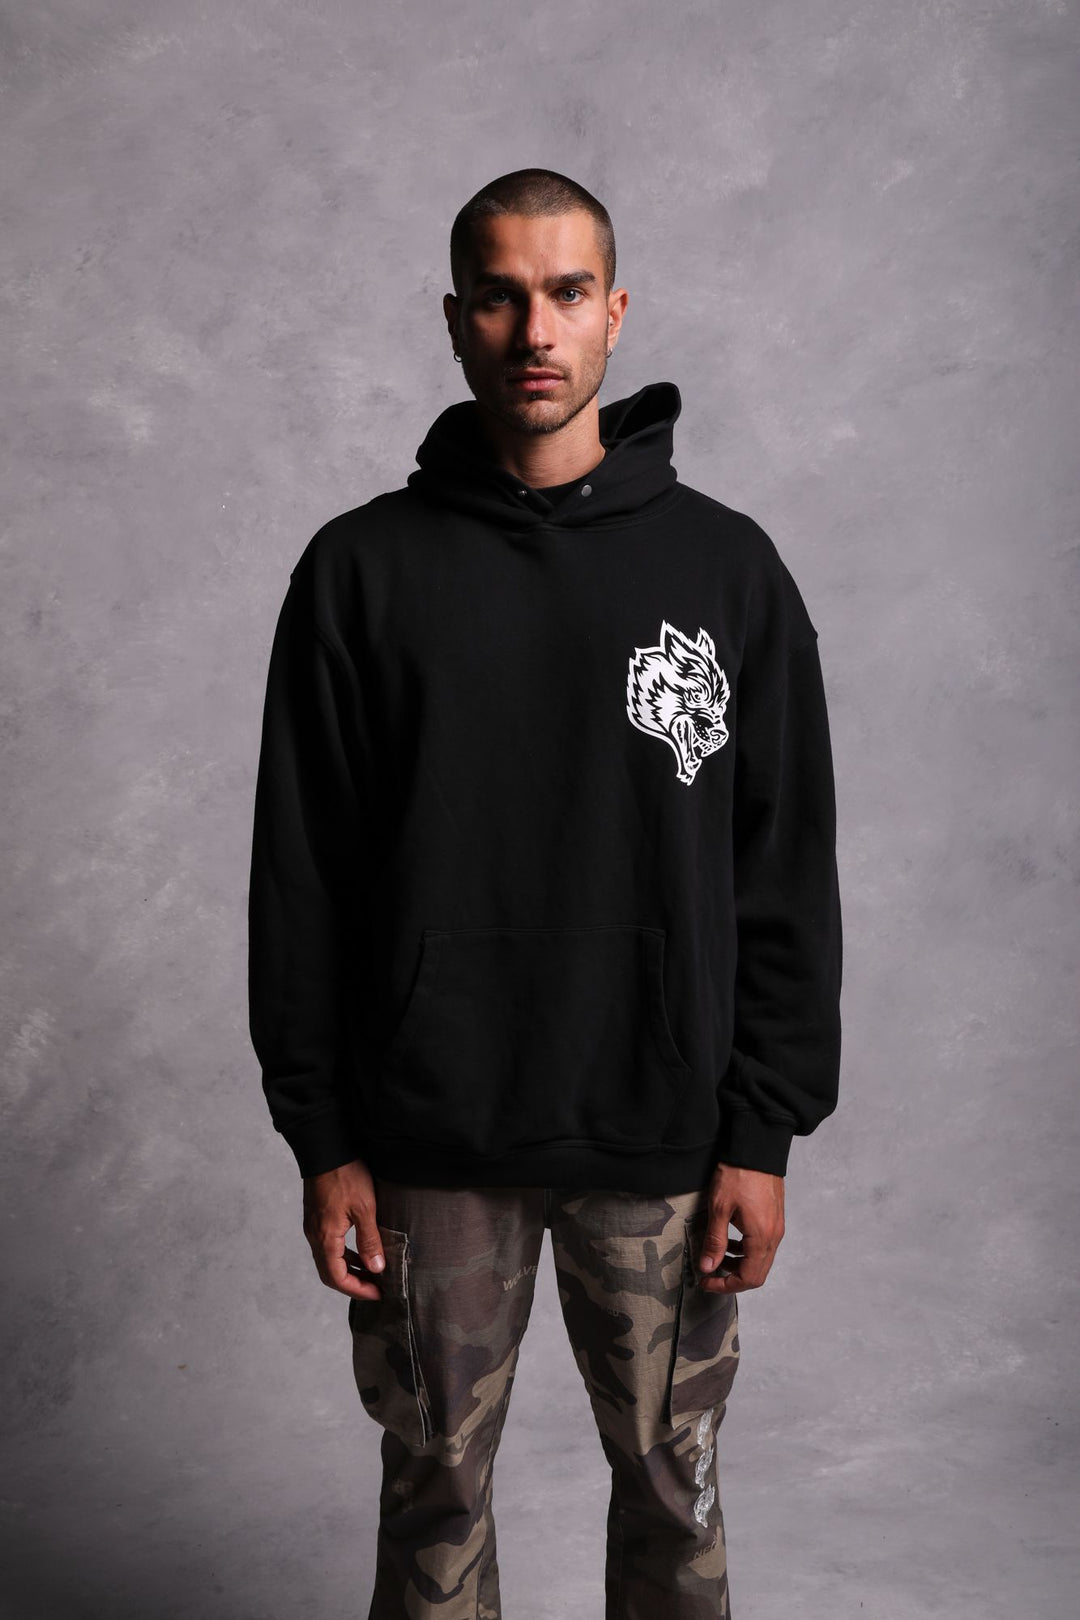 House Of Wolves "Cornell" Hoodie in Black